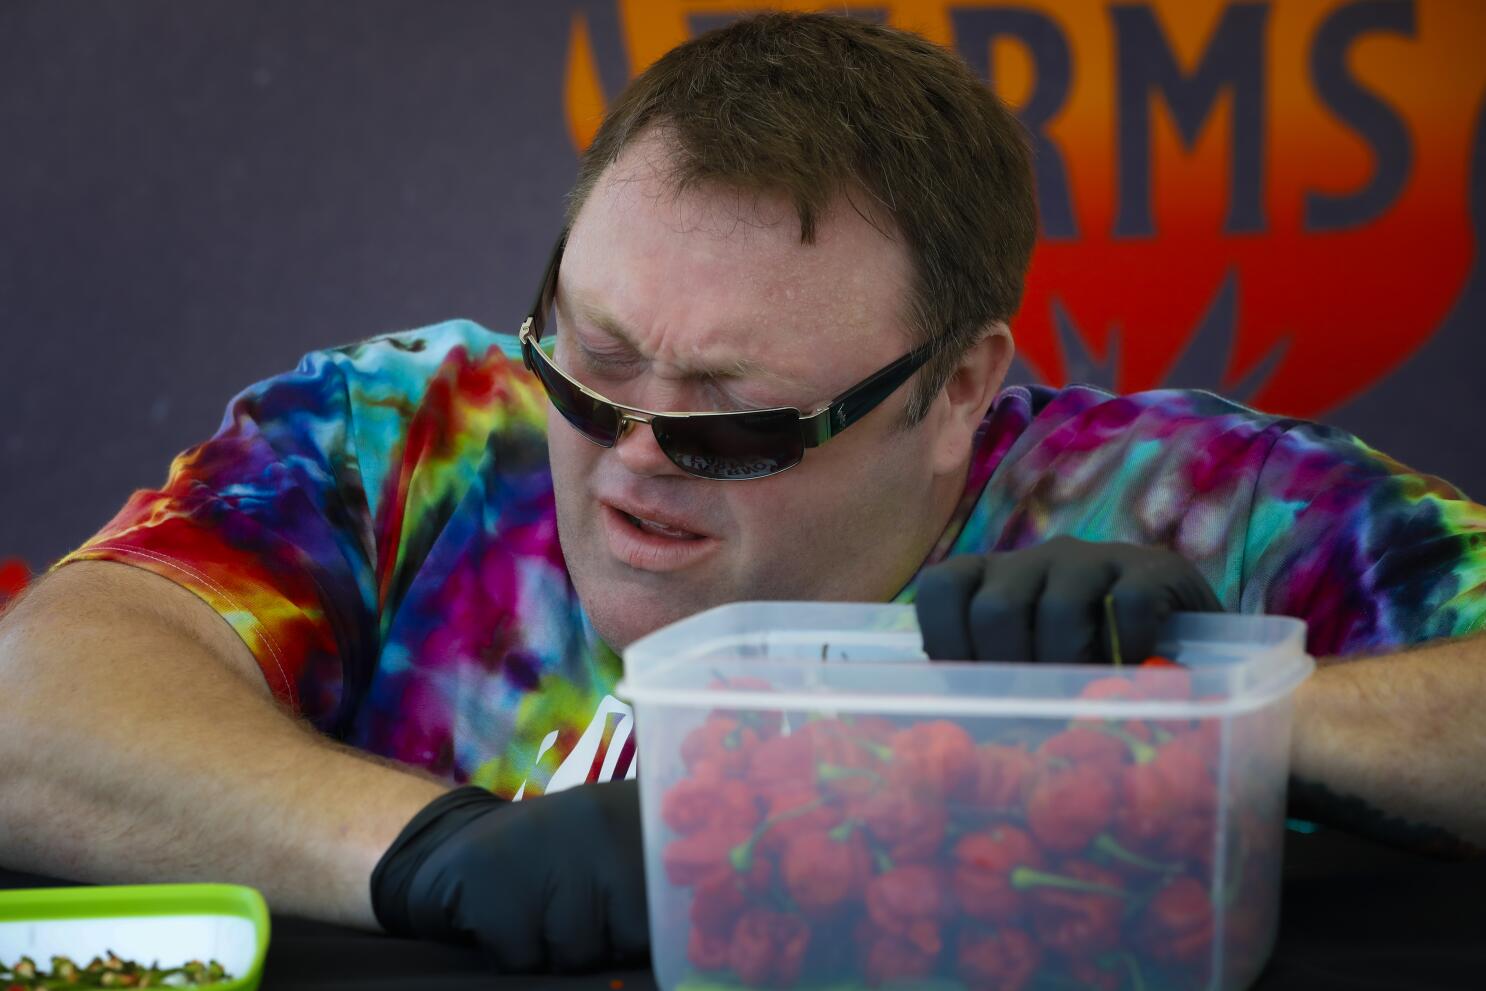 This is the record for eating the most Carolina Reaper, the